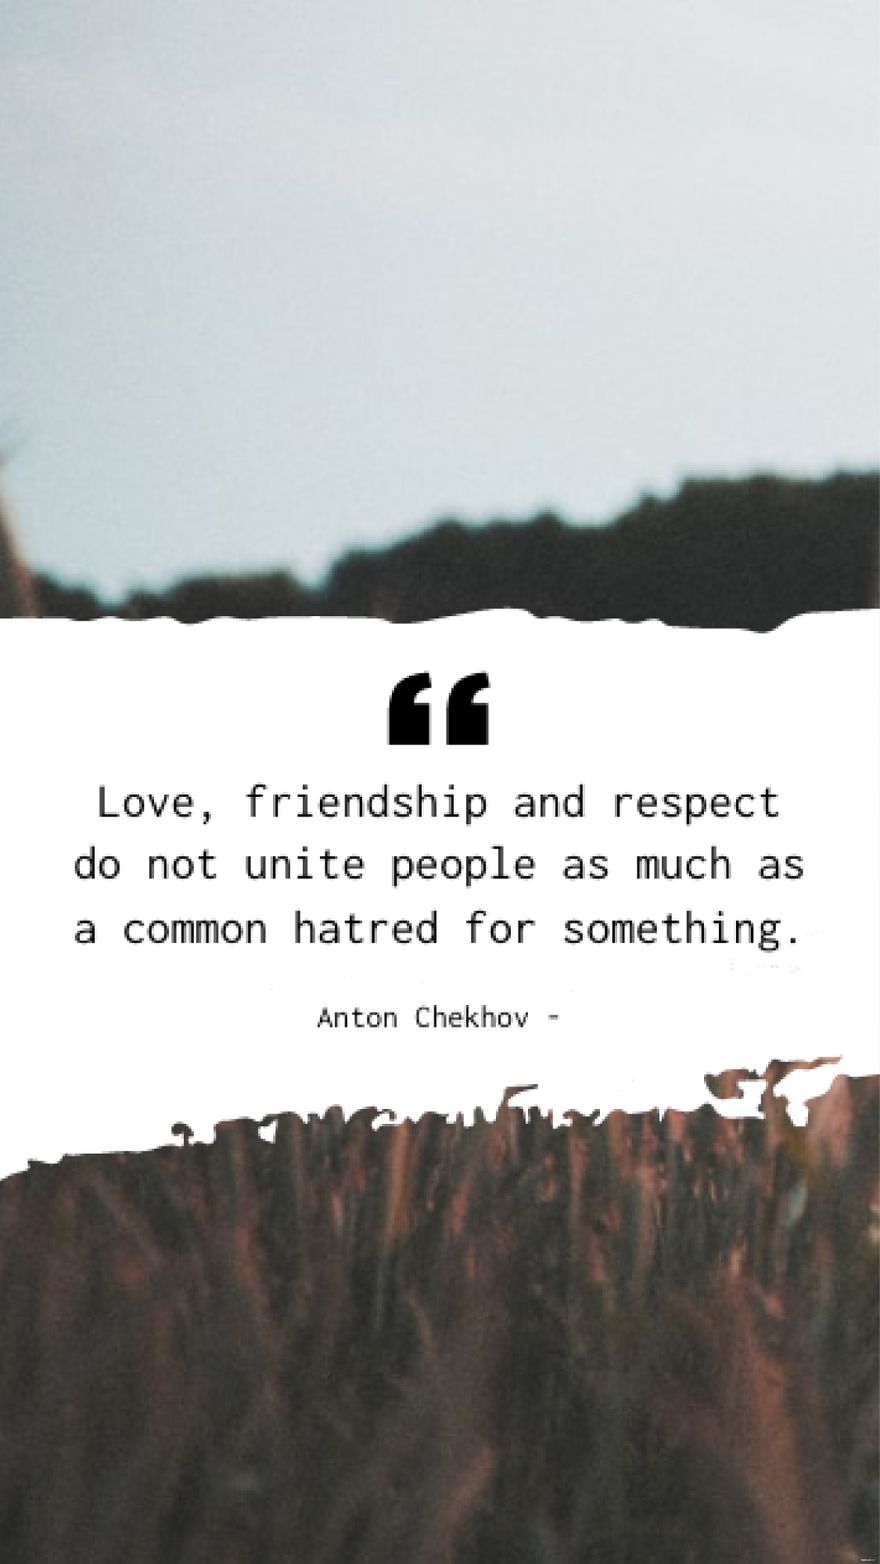 Anton Chekhov - Love, friendship and respect do not unite people as much as a common hatred for something.